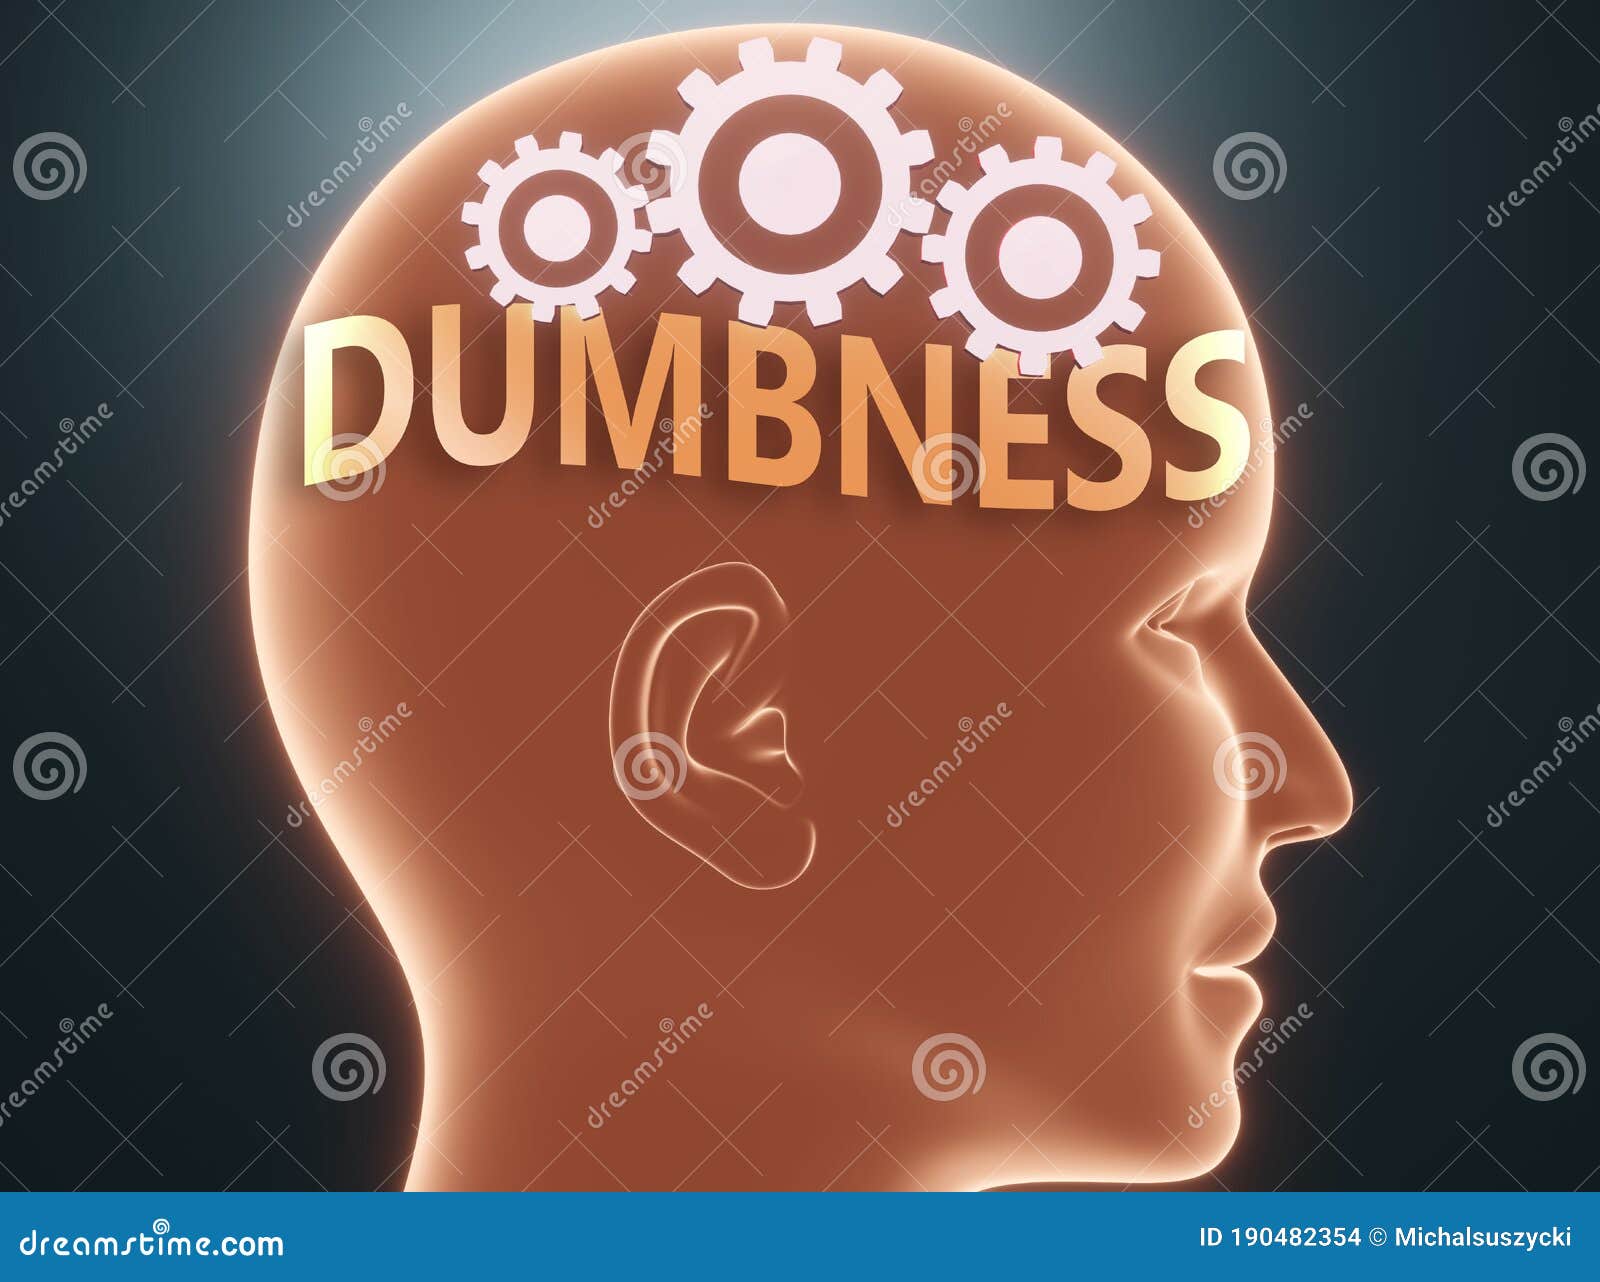 dumbness inside human mind - pictured as word dumbness inside a head with cogwheels to ize that dumbness is what people may